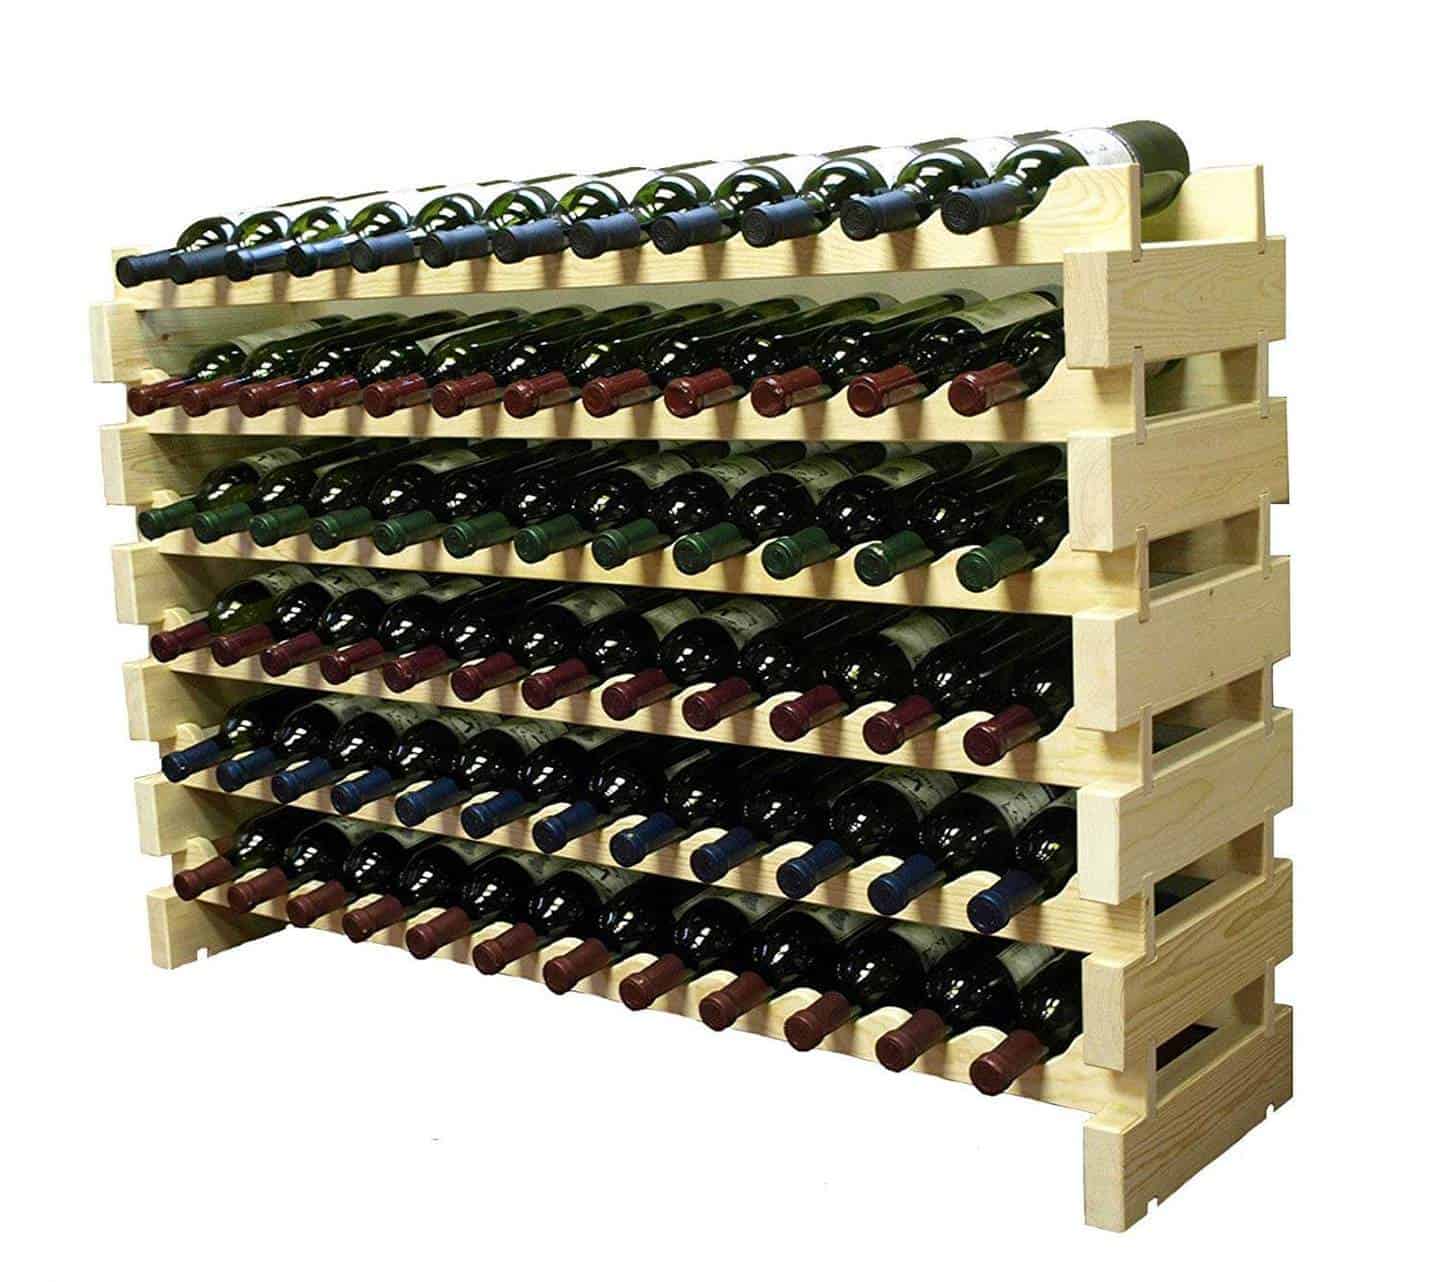 How to build your own wine cellar